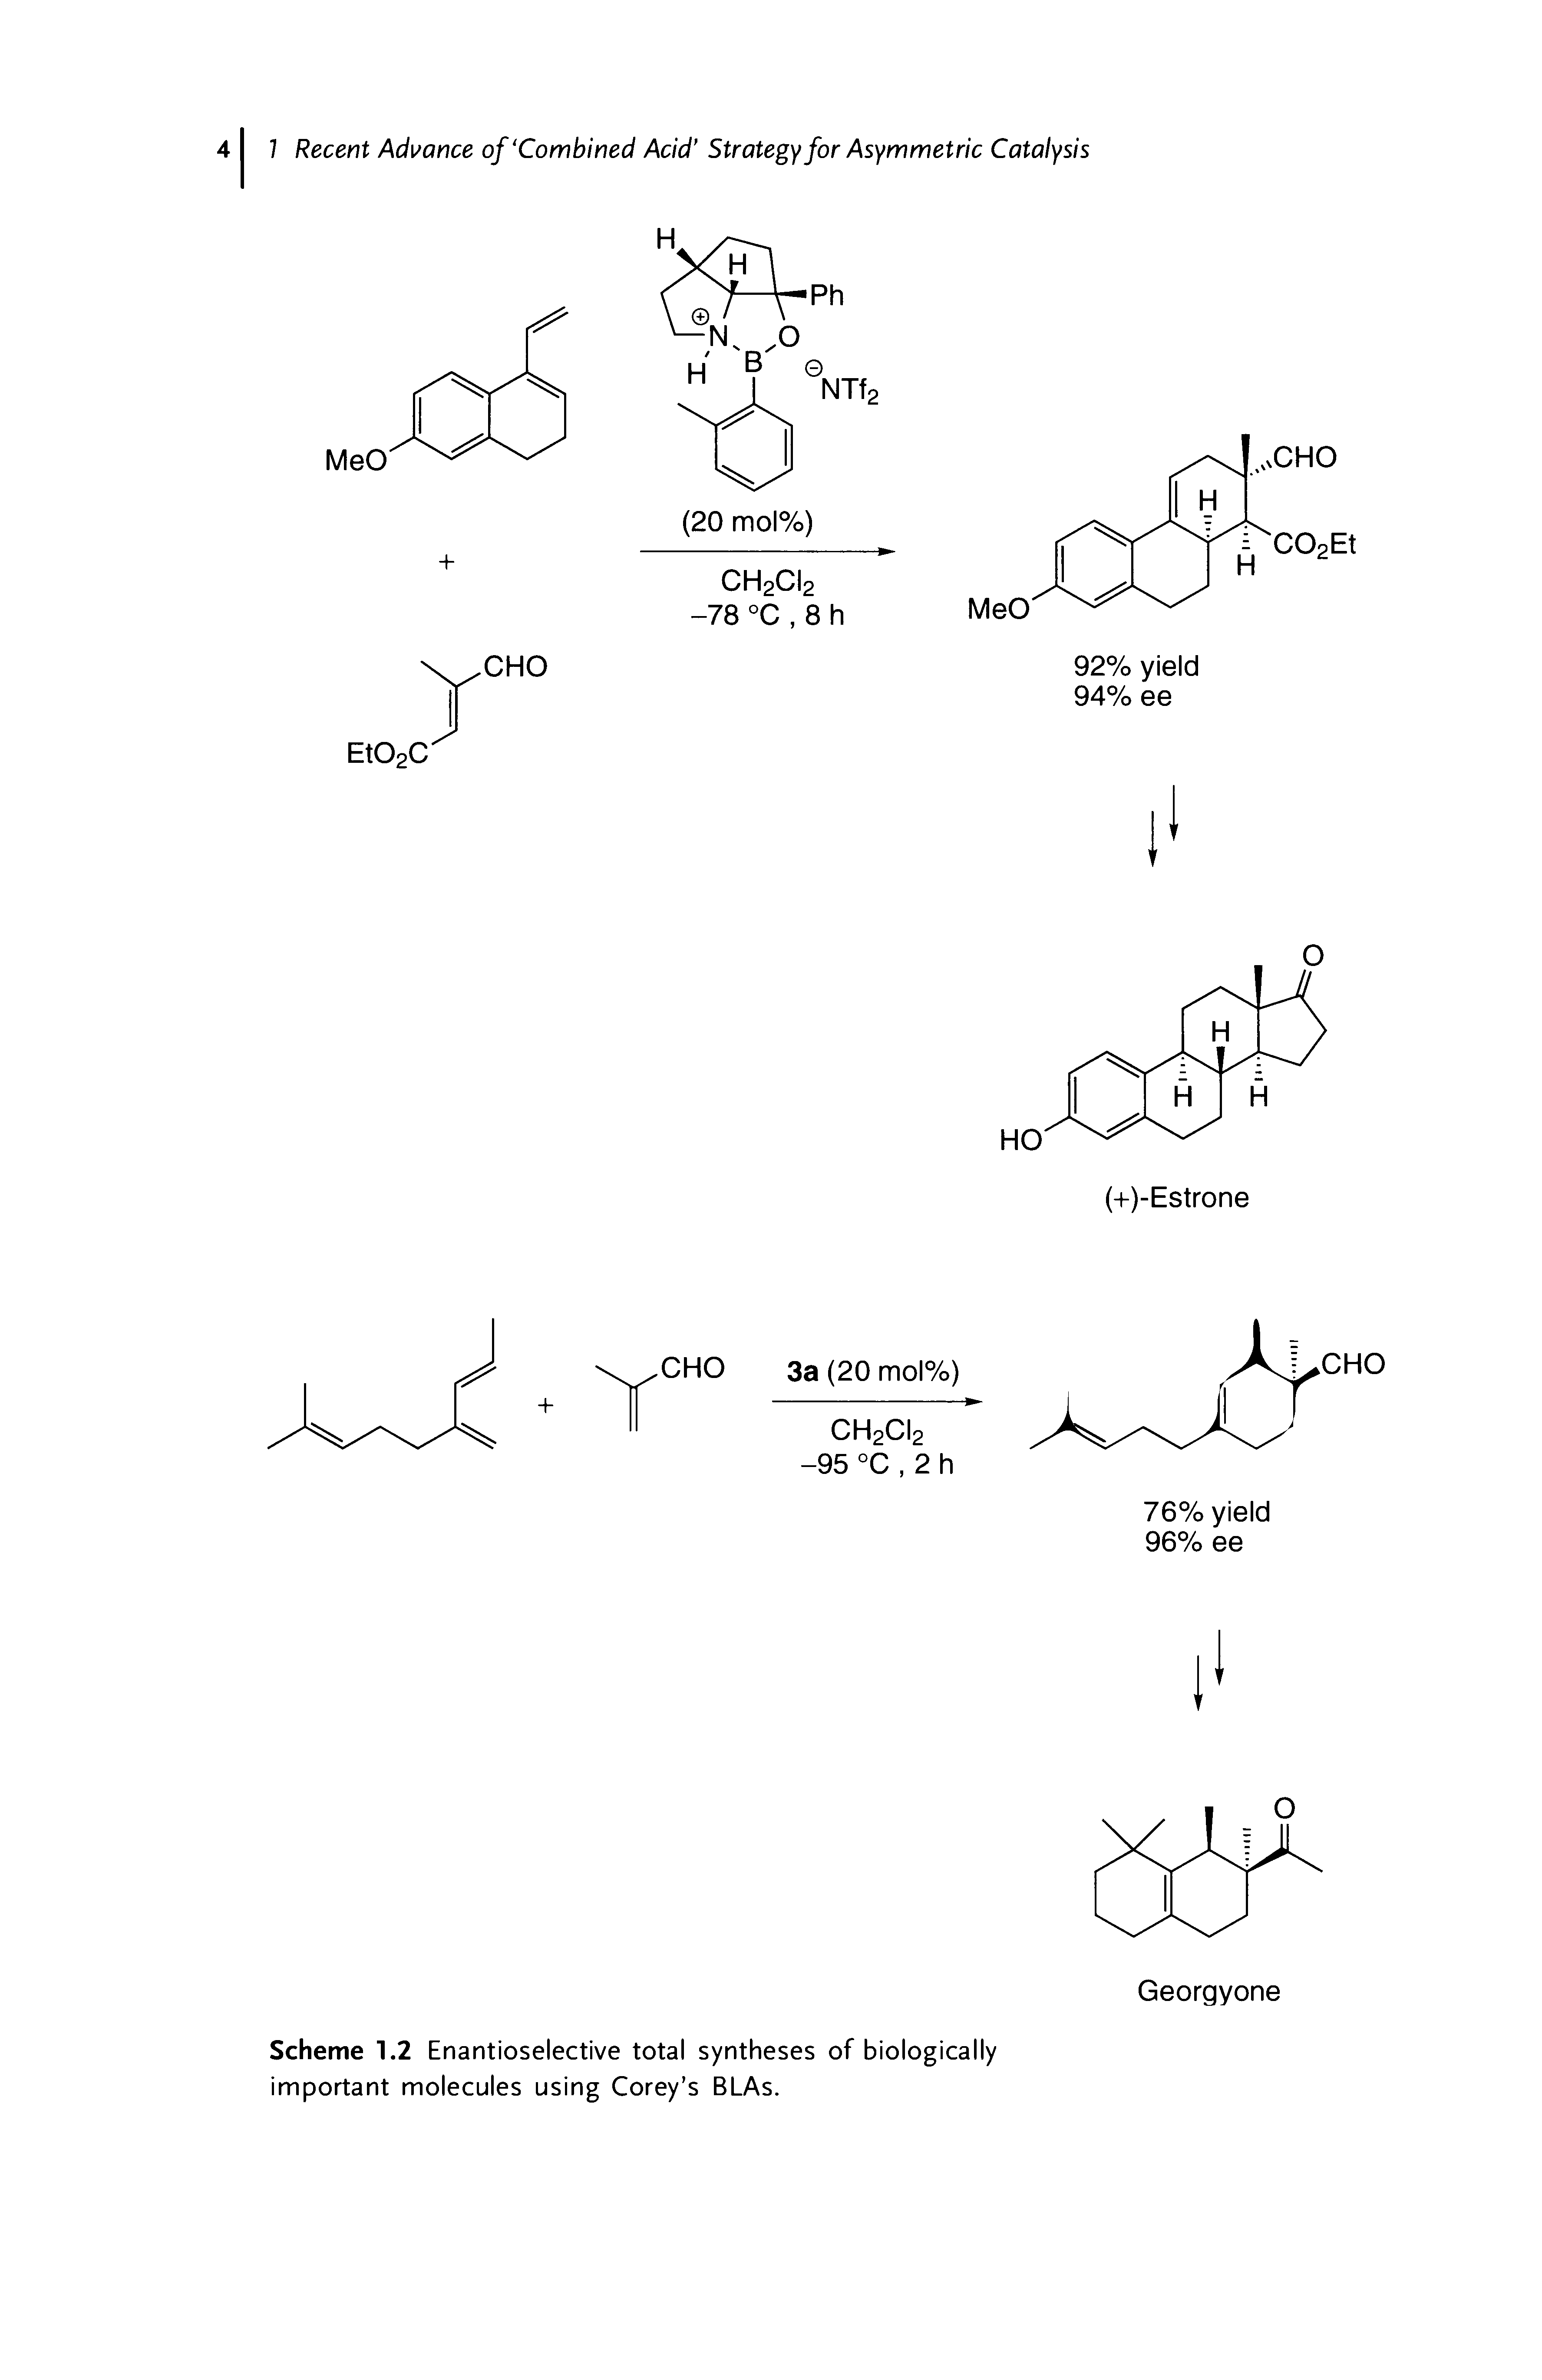 Scheme 1.2 Enantioselective total syntheses of biologically important molecules using Corey s BLAs.